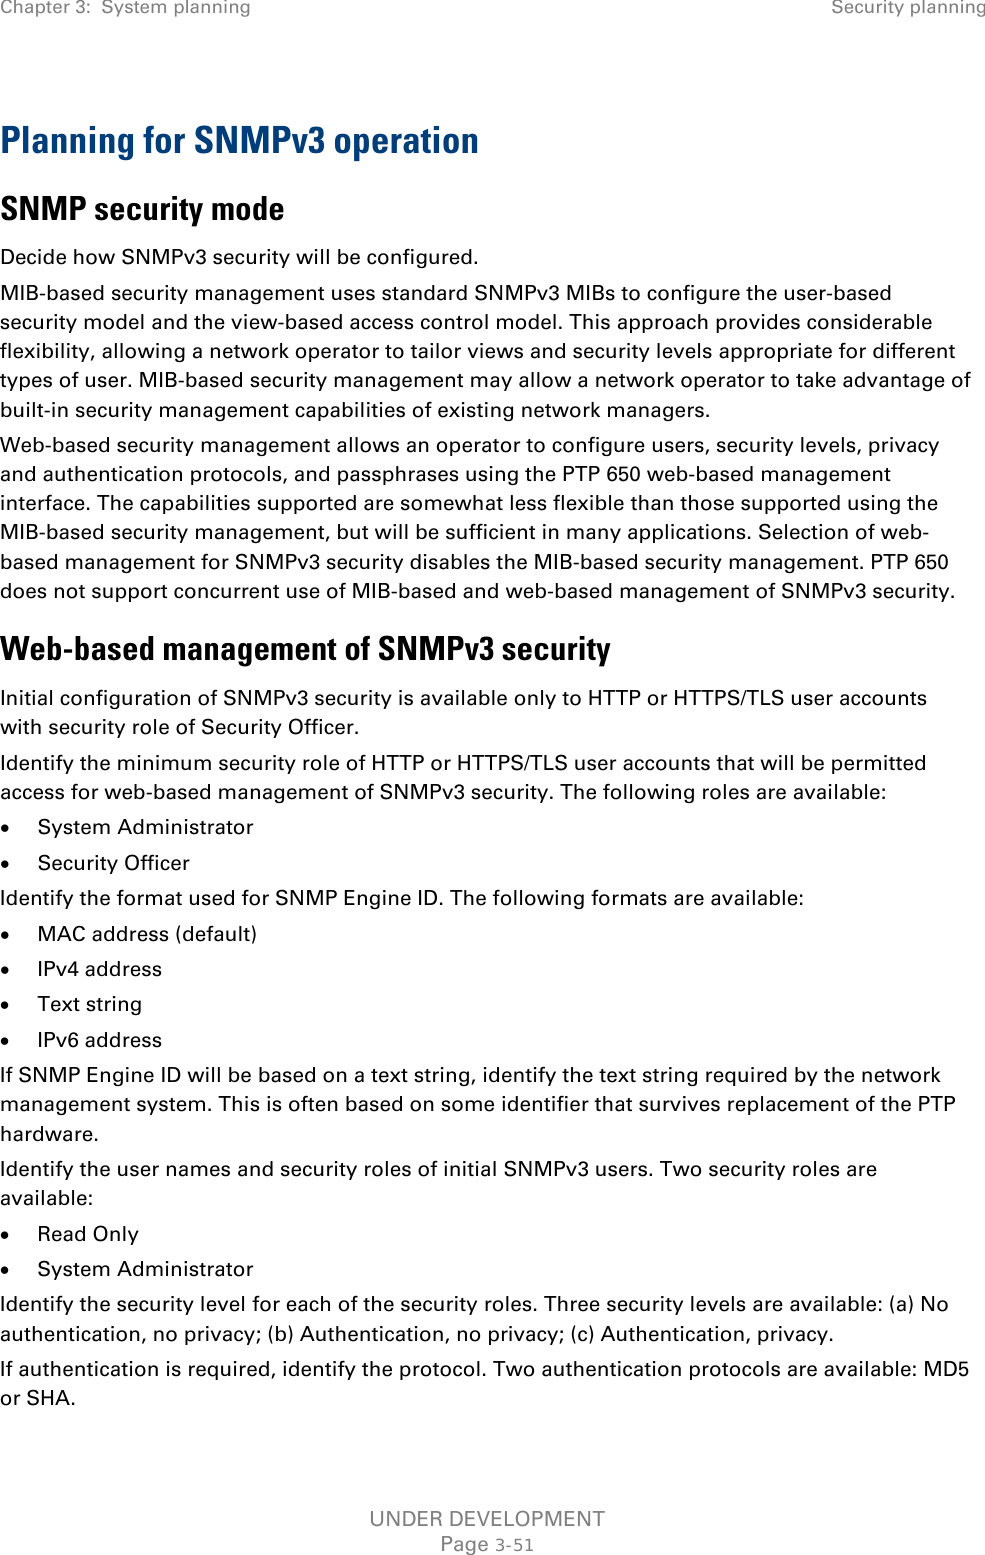 Chapter 3:  System planning Security planning  Planning for SNMPv3 operation SNMP security mode Decide how SNMPv3 security will be configured. MIB-based security management uses standard SNMPv3 MIBs to configure the user-based security model and the view-based access control model. This approach provides considerable flexibility, allowing a network operator to tailor views and security levels appropriate for different types of user. MIB-based security management may allow a network operator to take advantage of built-in security management capabilities of existing network managers. Web-based security management allows an operator to configure users, security levels, privacy and authentication protocols, and passphrases using the PTP 650 web-based management interface. The capabilities supported are somewhat less flexible than those supported using the MIB-based security management, but will be sufficient in many applications. Selection of web-based management for SNMPv3 security disables the MIB-based security management. PTP 650 does not support concurrent use of MIB-based and web-based management of SNMPv3 security. Web-based management of SNMPv3 security Initial configuration of SNMPv3 security is available only to HTTP or HTTPS/TLS user accounts with security role of Security Officer. Identify the minimum security role of HTTP or HTTPS/TLS user accounts that will be permitted access for web-based management of SNMPv3 security. The following roles are available: • System Administrator • Security Officer Identify the format used for SNMP Engine ID. The following formats are available: • MAC address (default) • IPv4 address • Text string • IPv6 address If SNMP Engine ID will be based on a text string, identify the text string required by the network management system. This is often based on some identifier that survives replacement of the PTP hardware. Identify the user names and security roles of initial SNMPv3 users. Two security roles are available: • Read Only • System Administrator Identify the security level for each of the security roles. Three security levels are available: (a) No authentication, no privacy; (b) Authentication, no privacy; (c) Authentication, privacy. If authentication is required, identify the protocol. Two authentication protocols are available: MD5 or SHA. UNDER DEVELOPMENT Page 3-51 